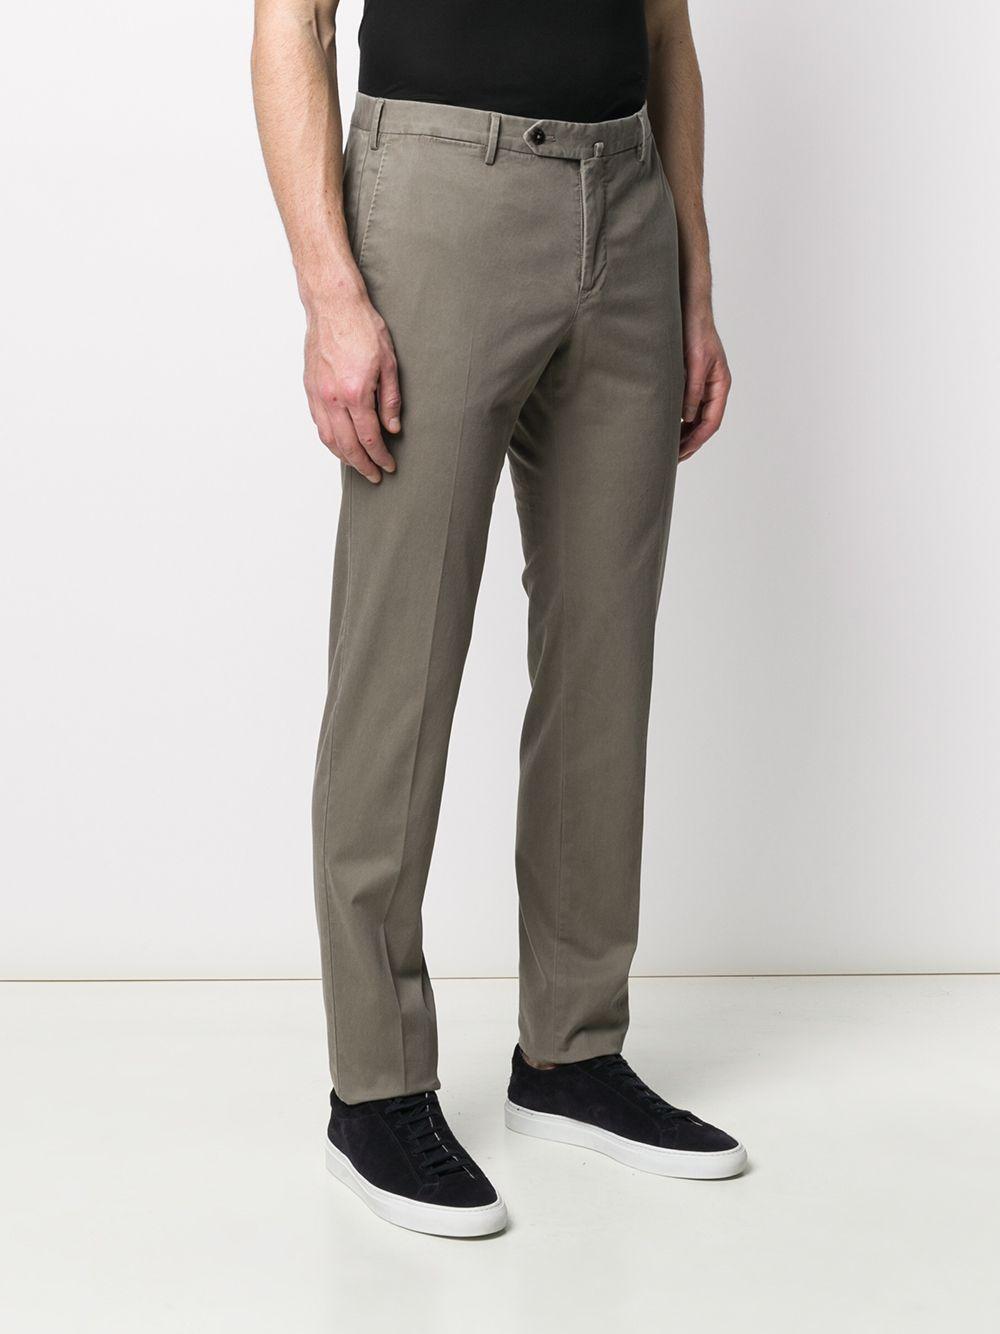 PT01 Cotton Straight-leg Chinos in Grey (Gray) for Men - Save 16% - Lyst